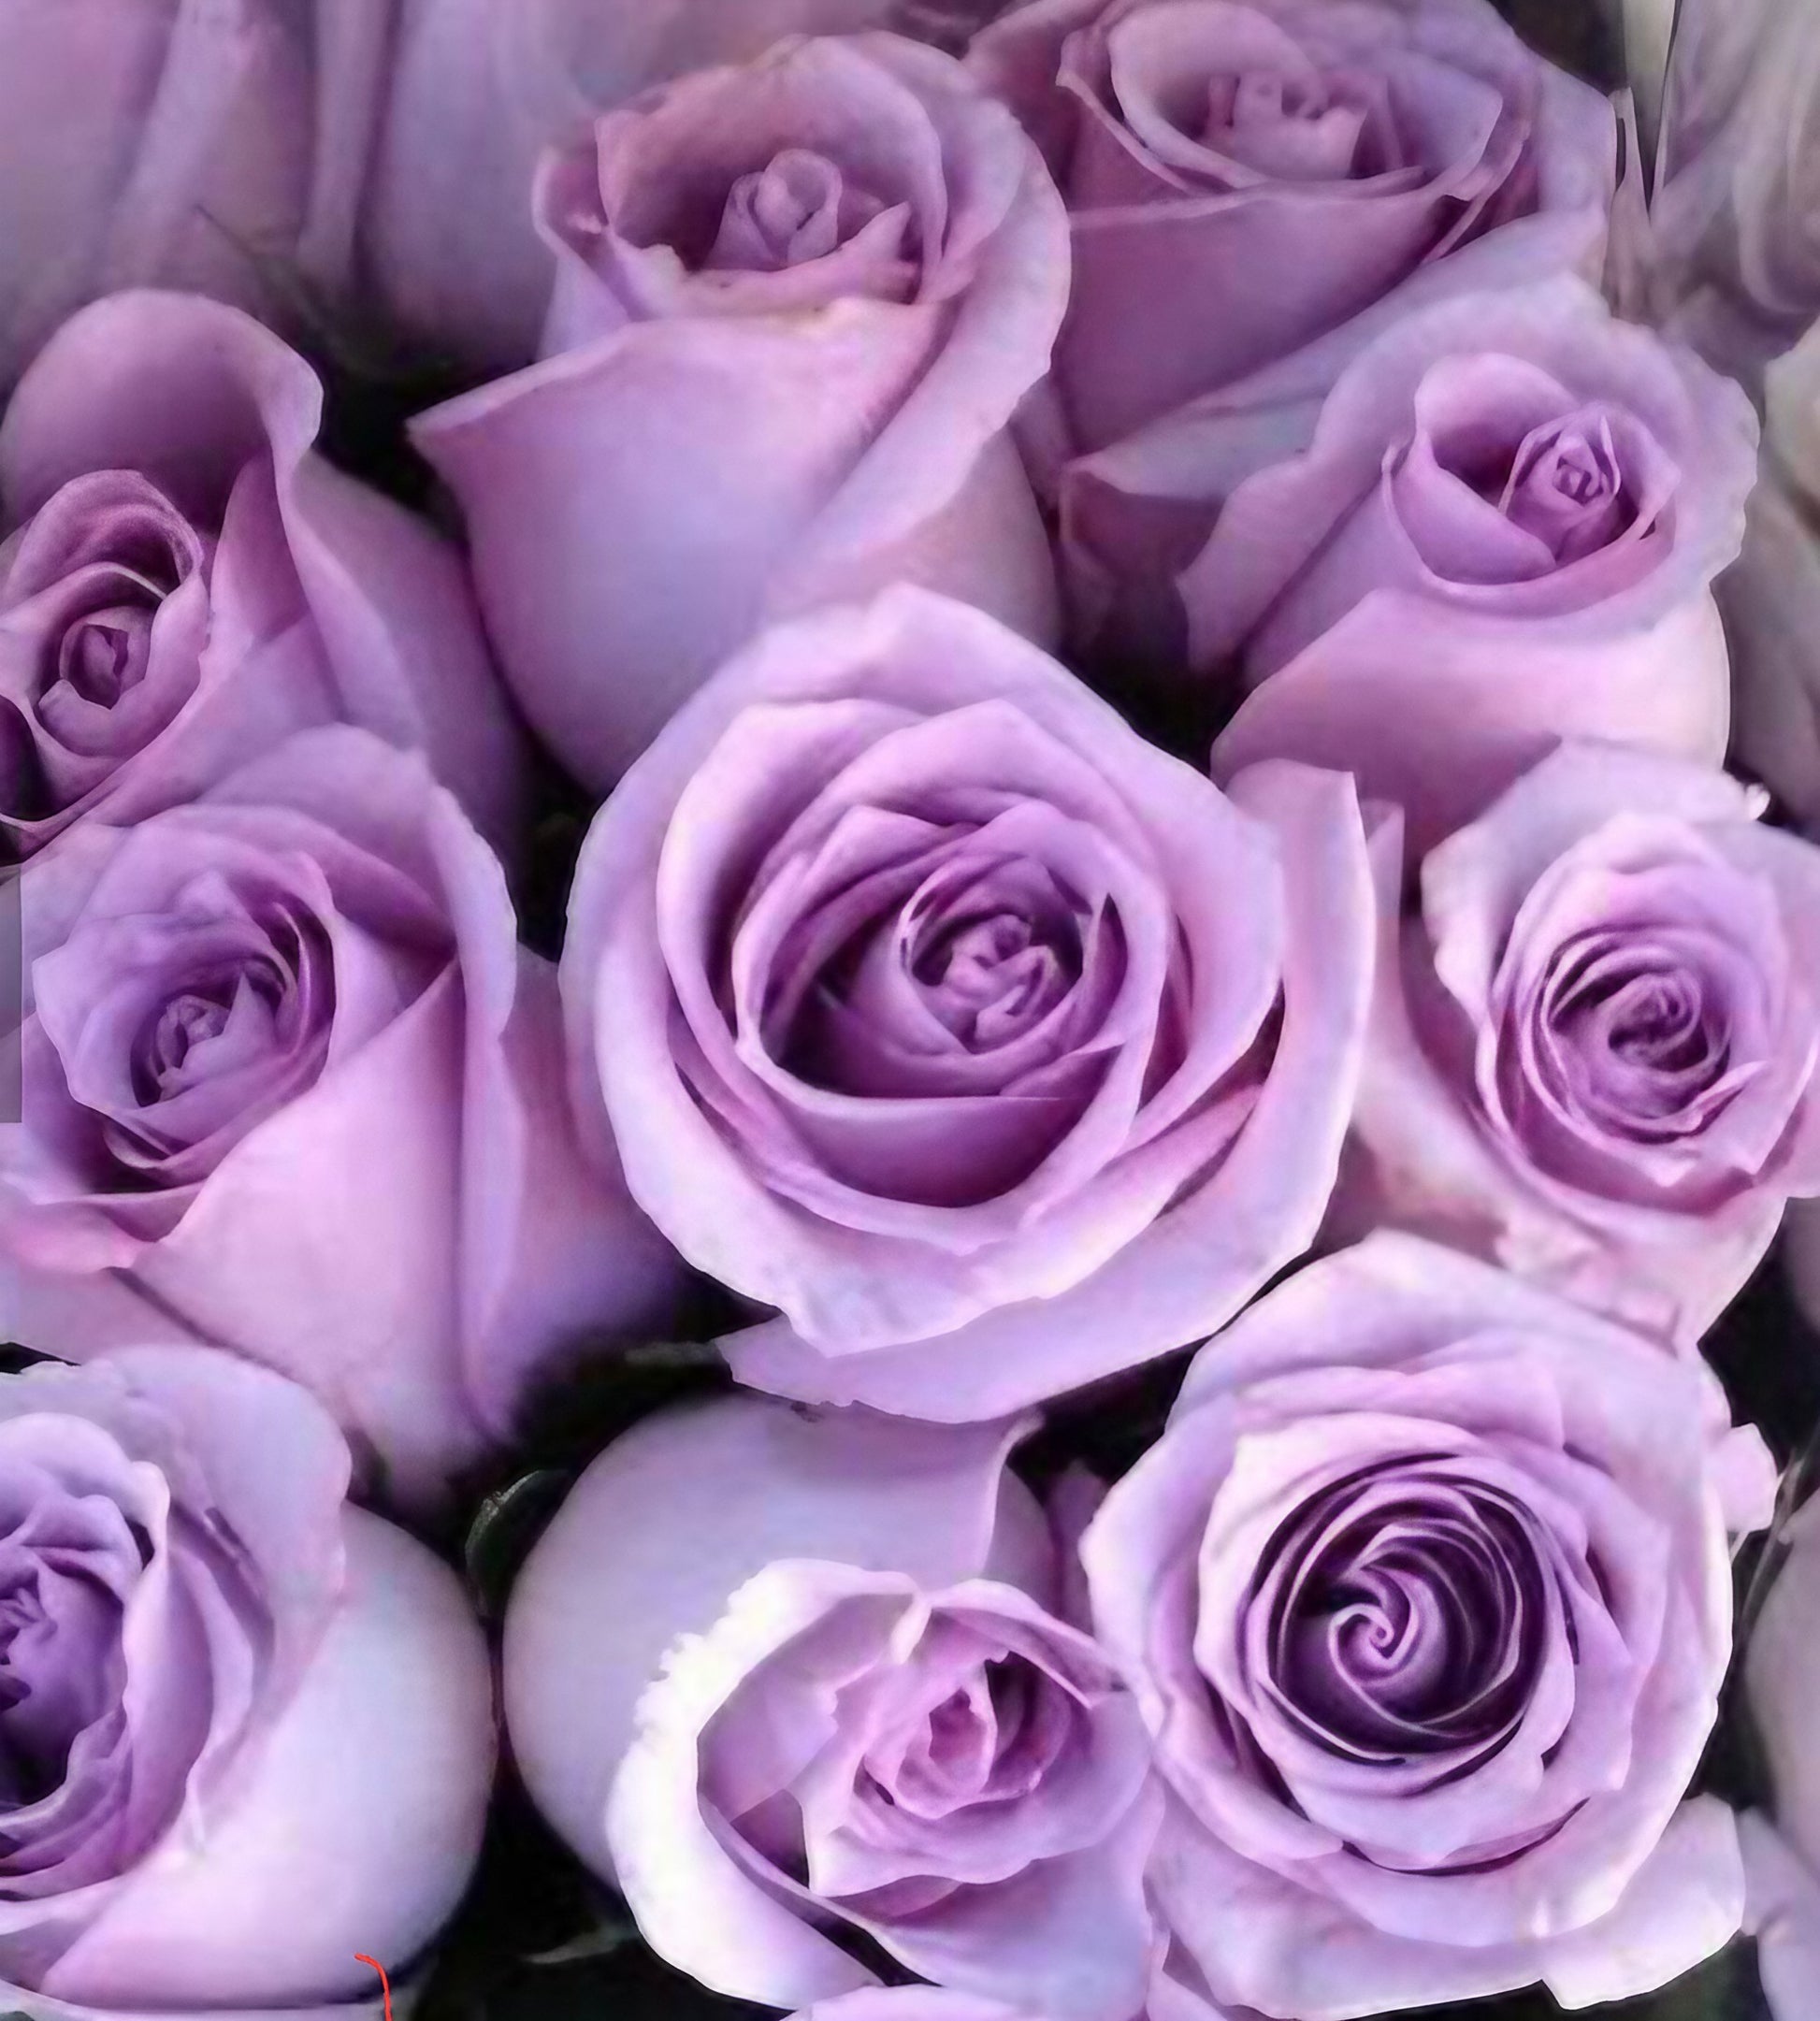 Love Story product displaying purple roses arranged in a vase